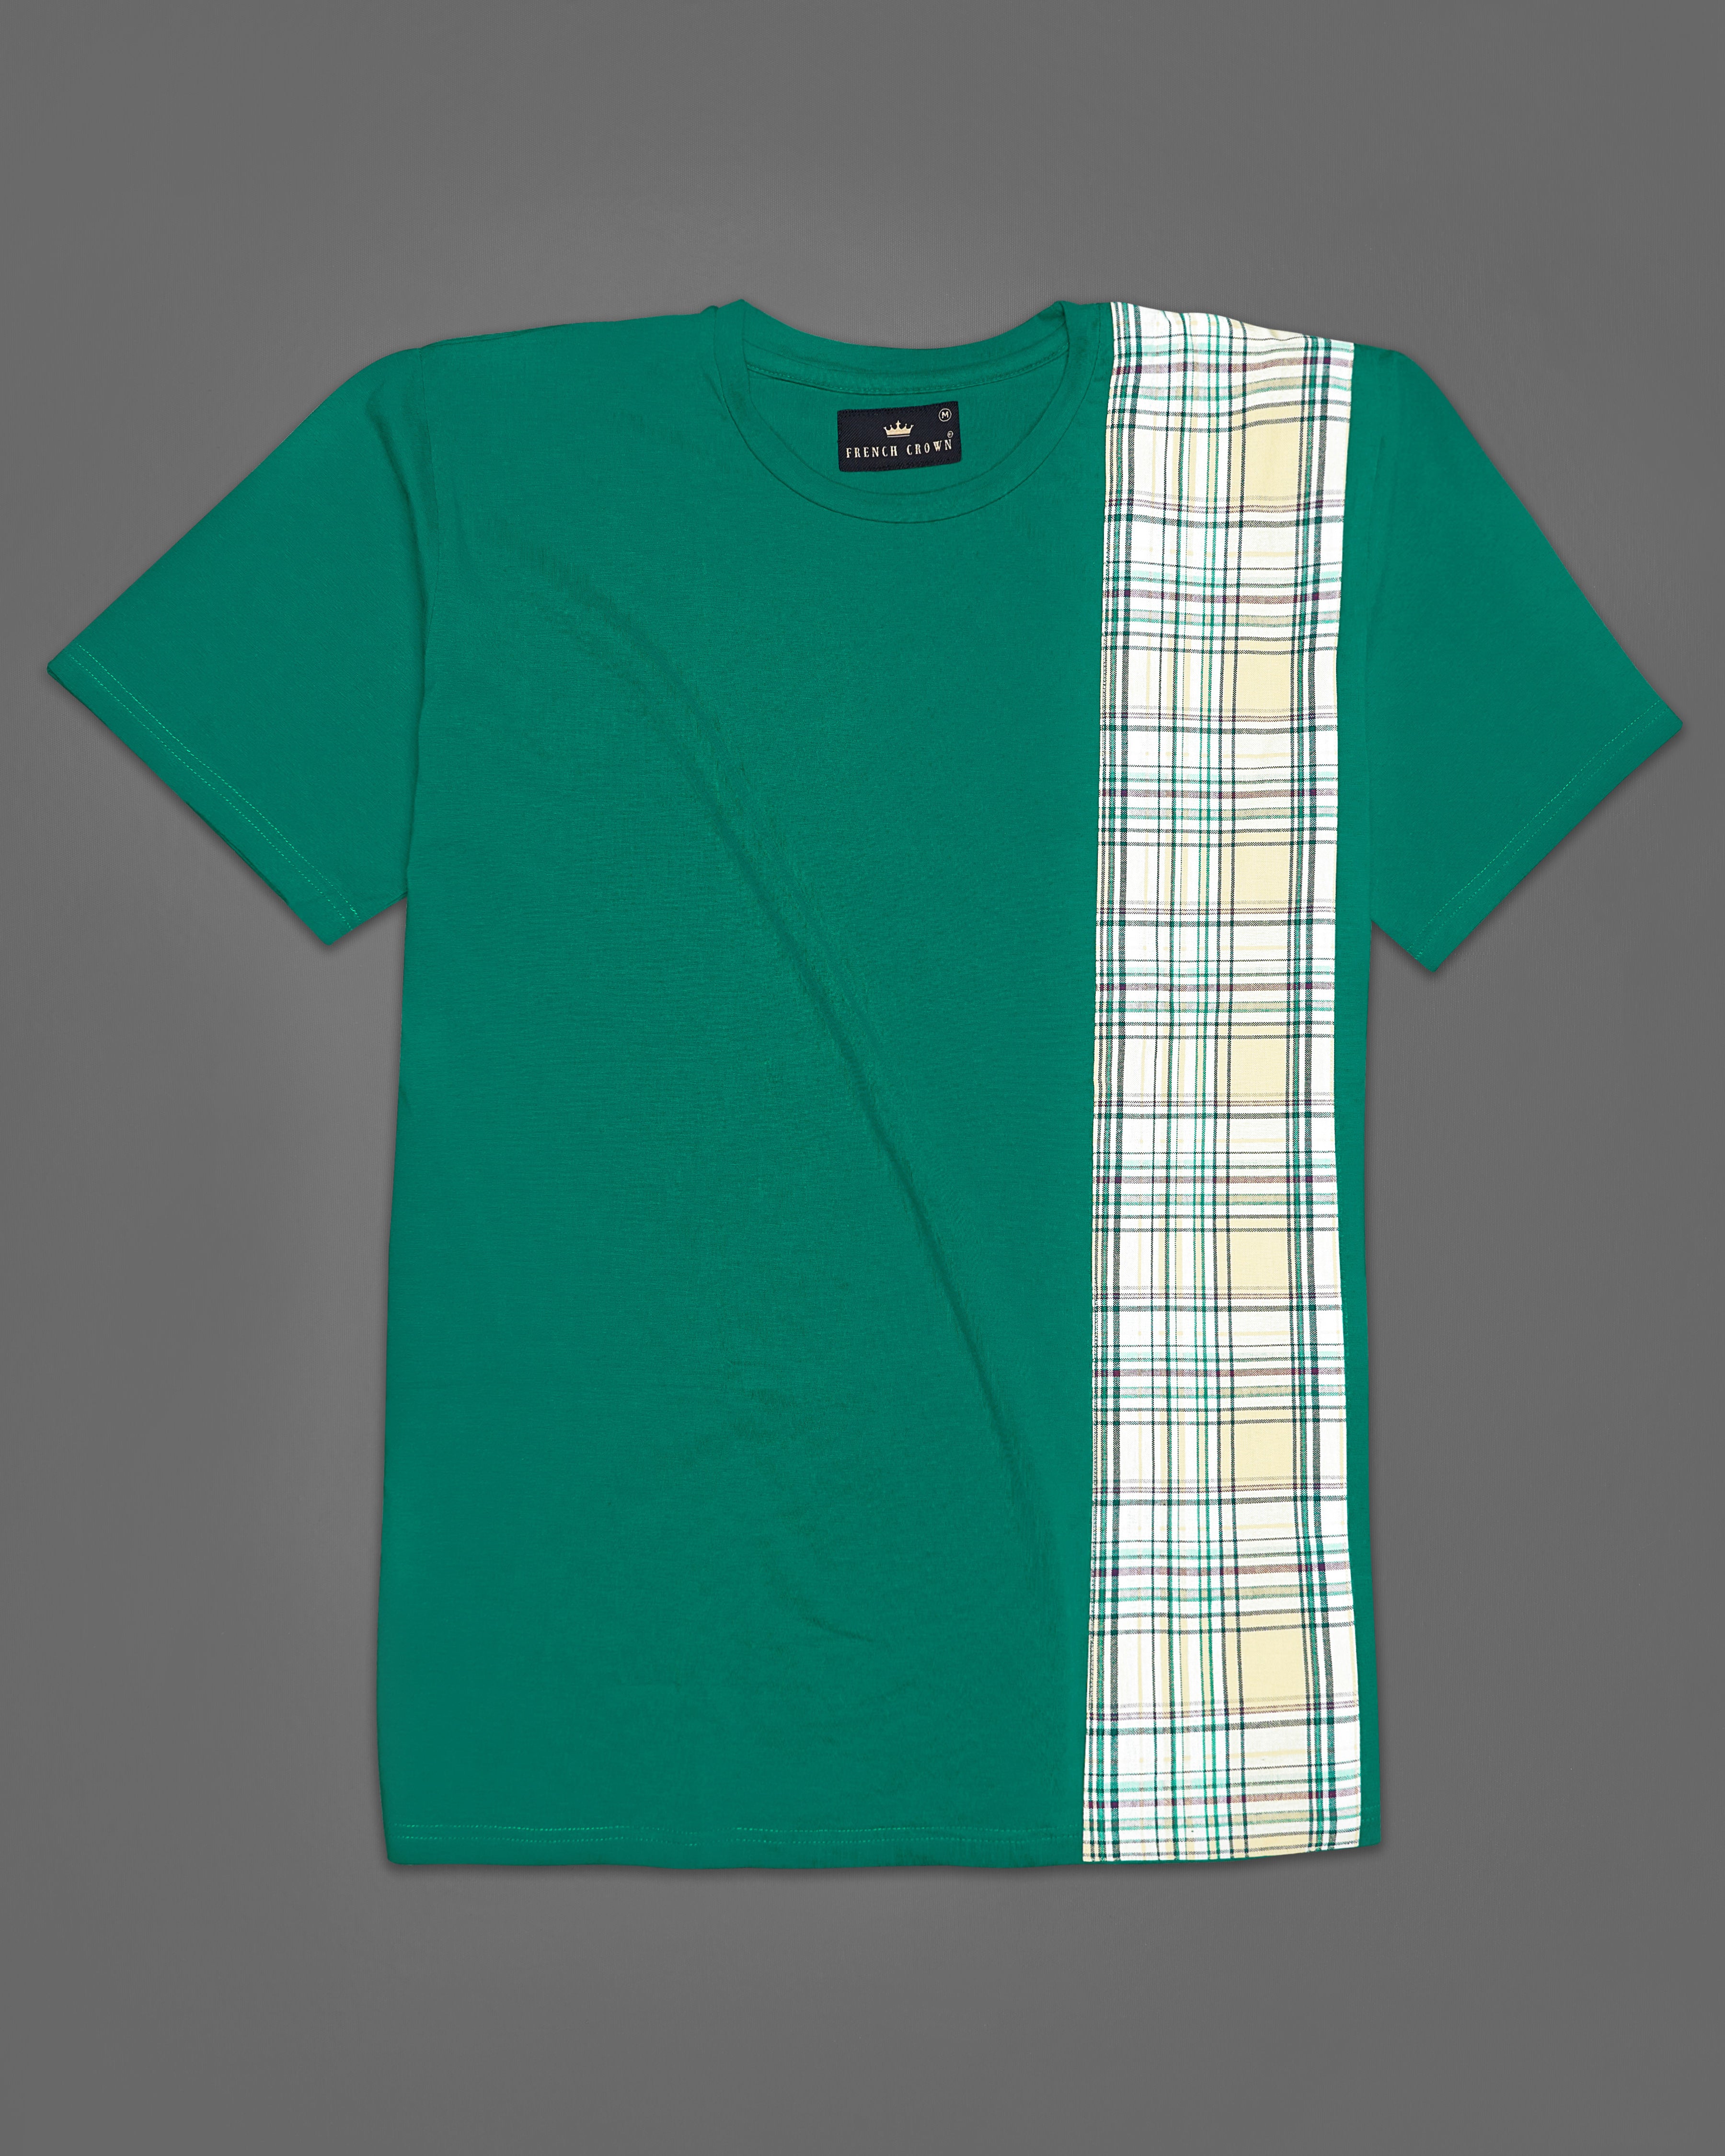 Tropical Green with Checkered PatchWork Organic Designer T-shirt TS005-W02-S, TS005-W02-M, TS005-W02-L, TS005-W02-XL, TS005-W02-XXL